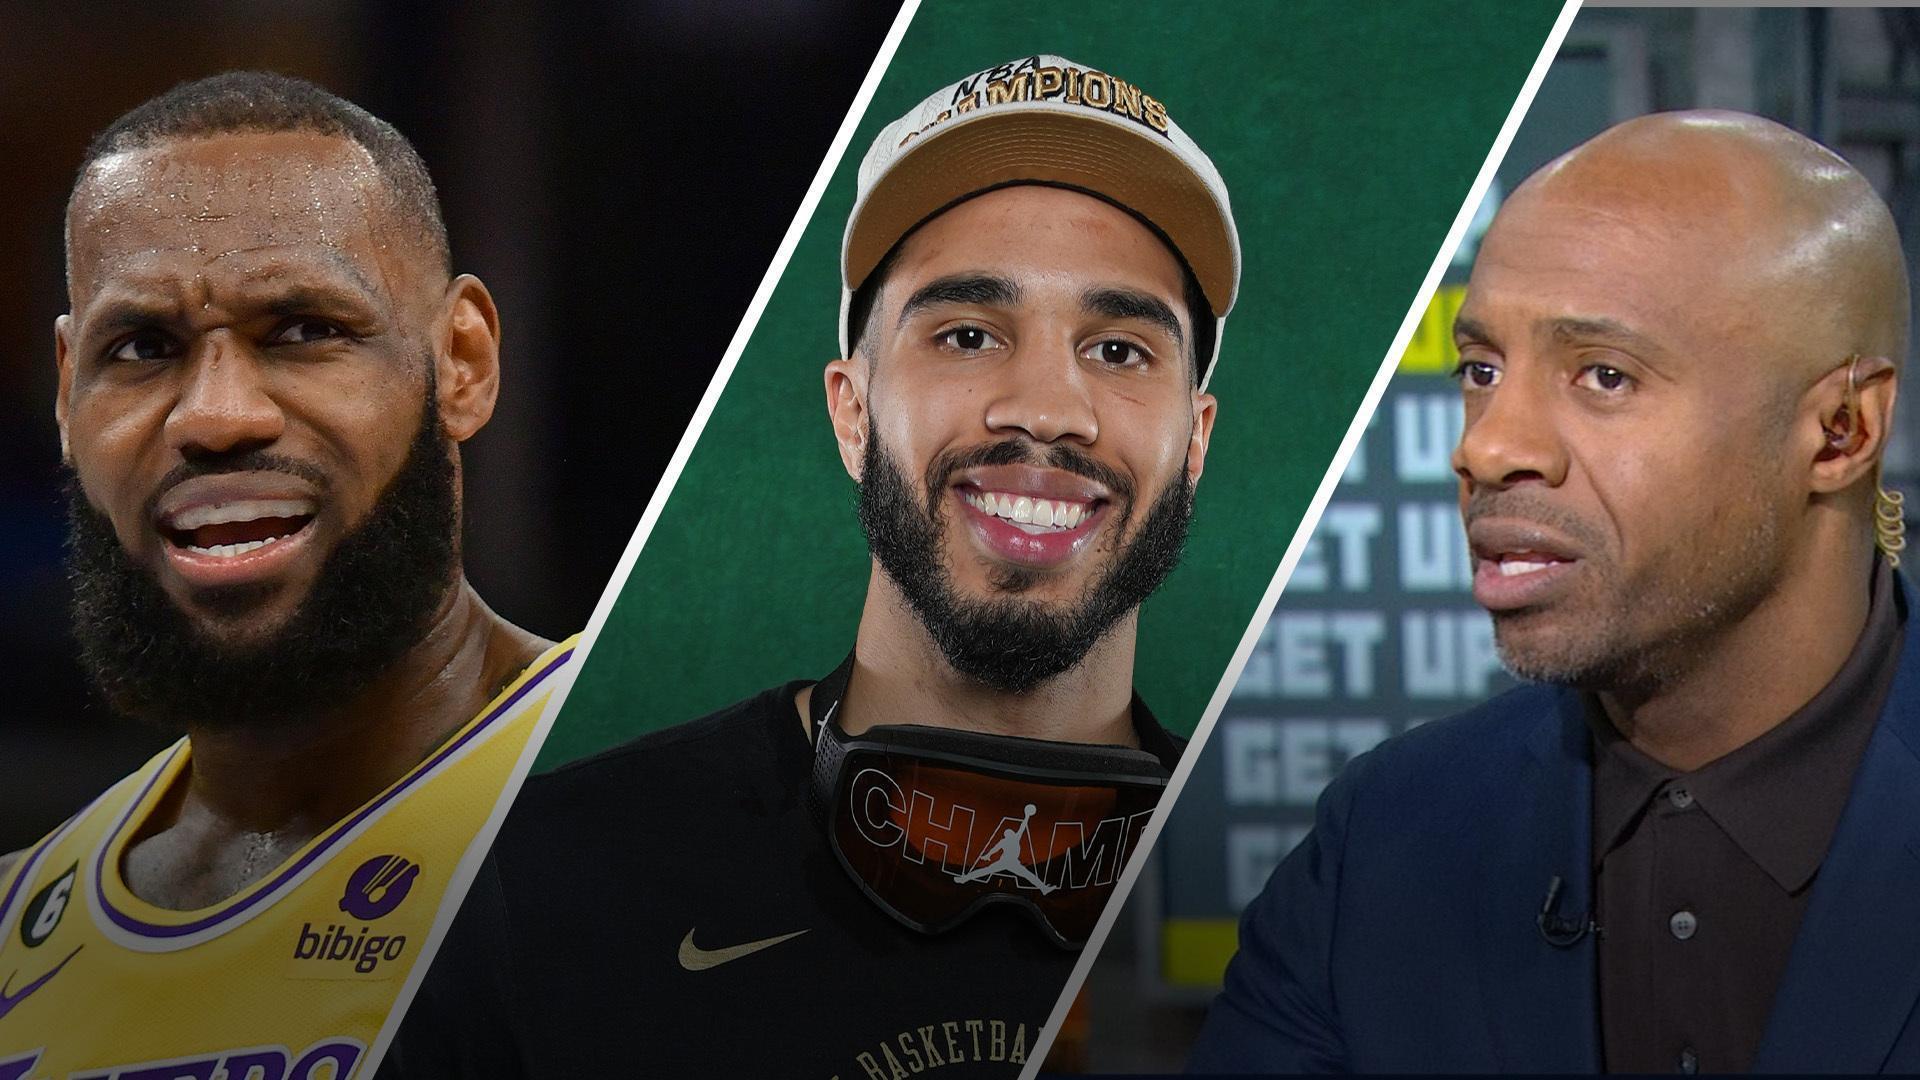 Andraya Carter, Jay Williams, and Monica McNutt examine the outlook for future title success for the Celtics and Lakers.